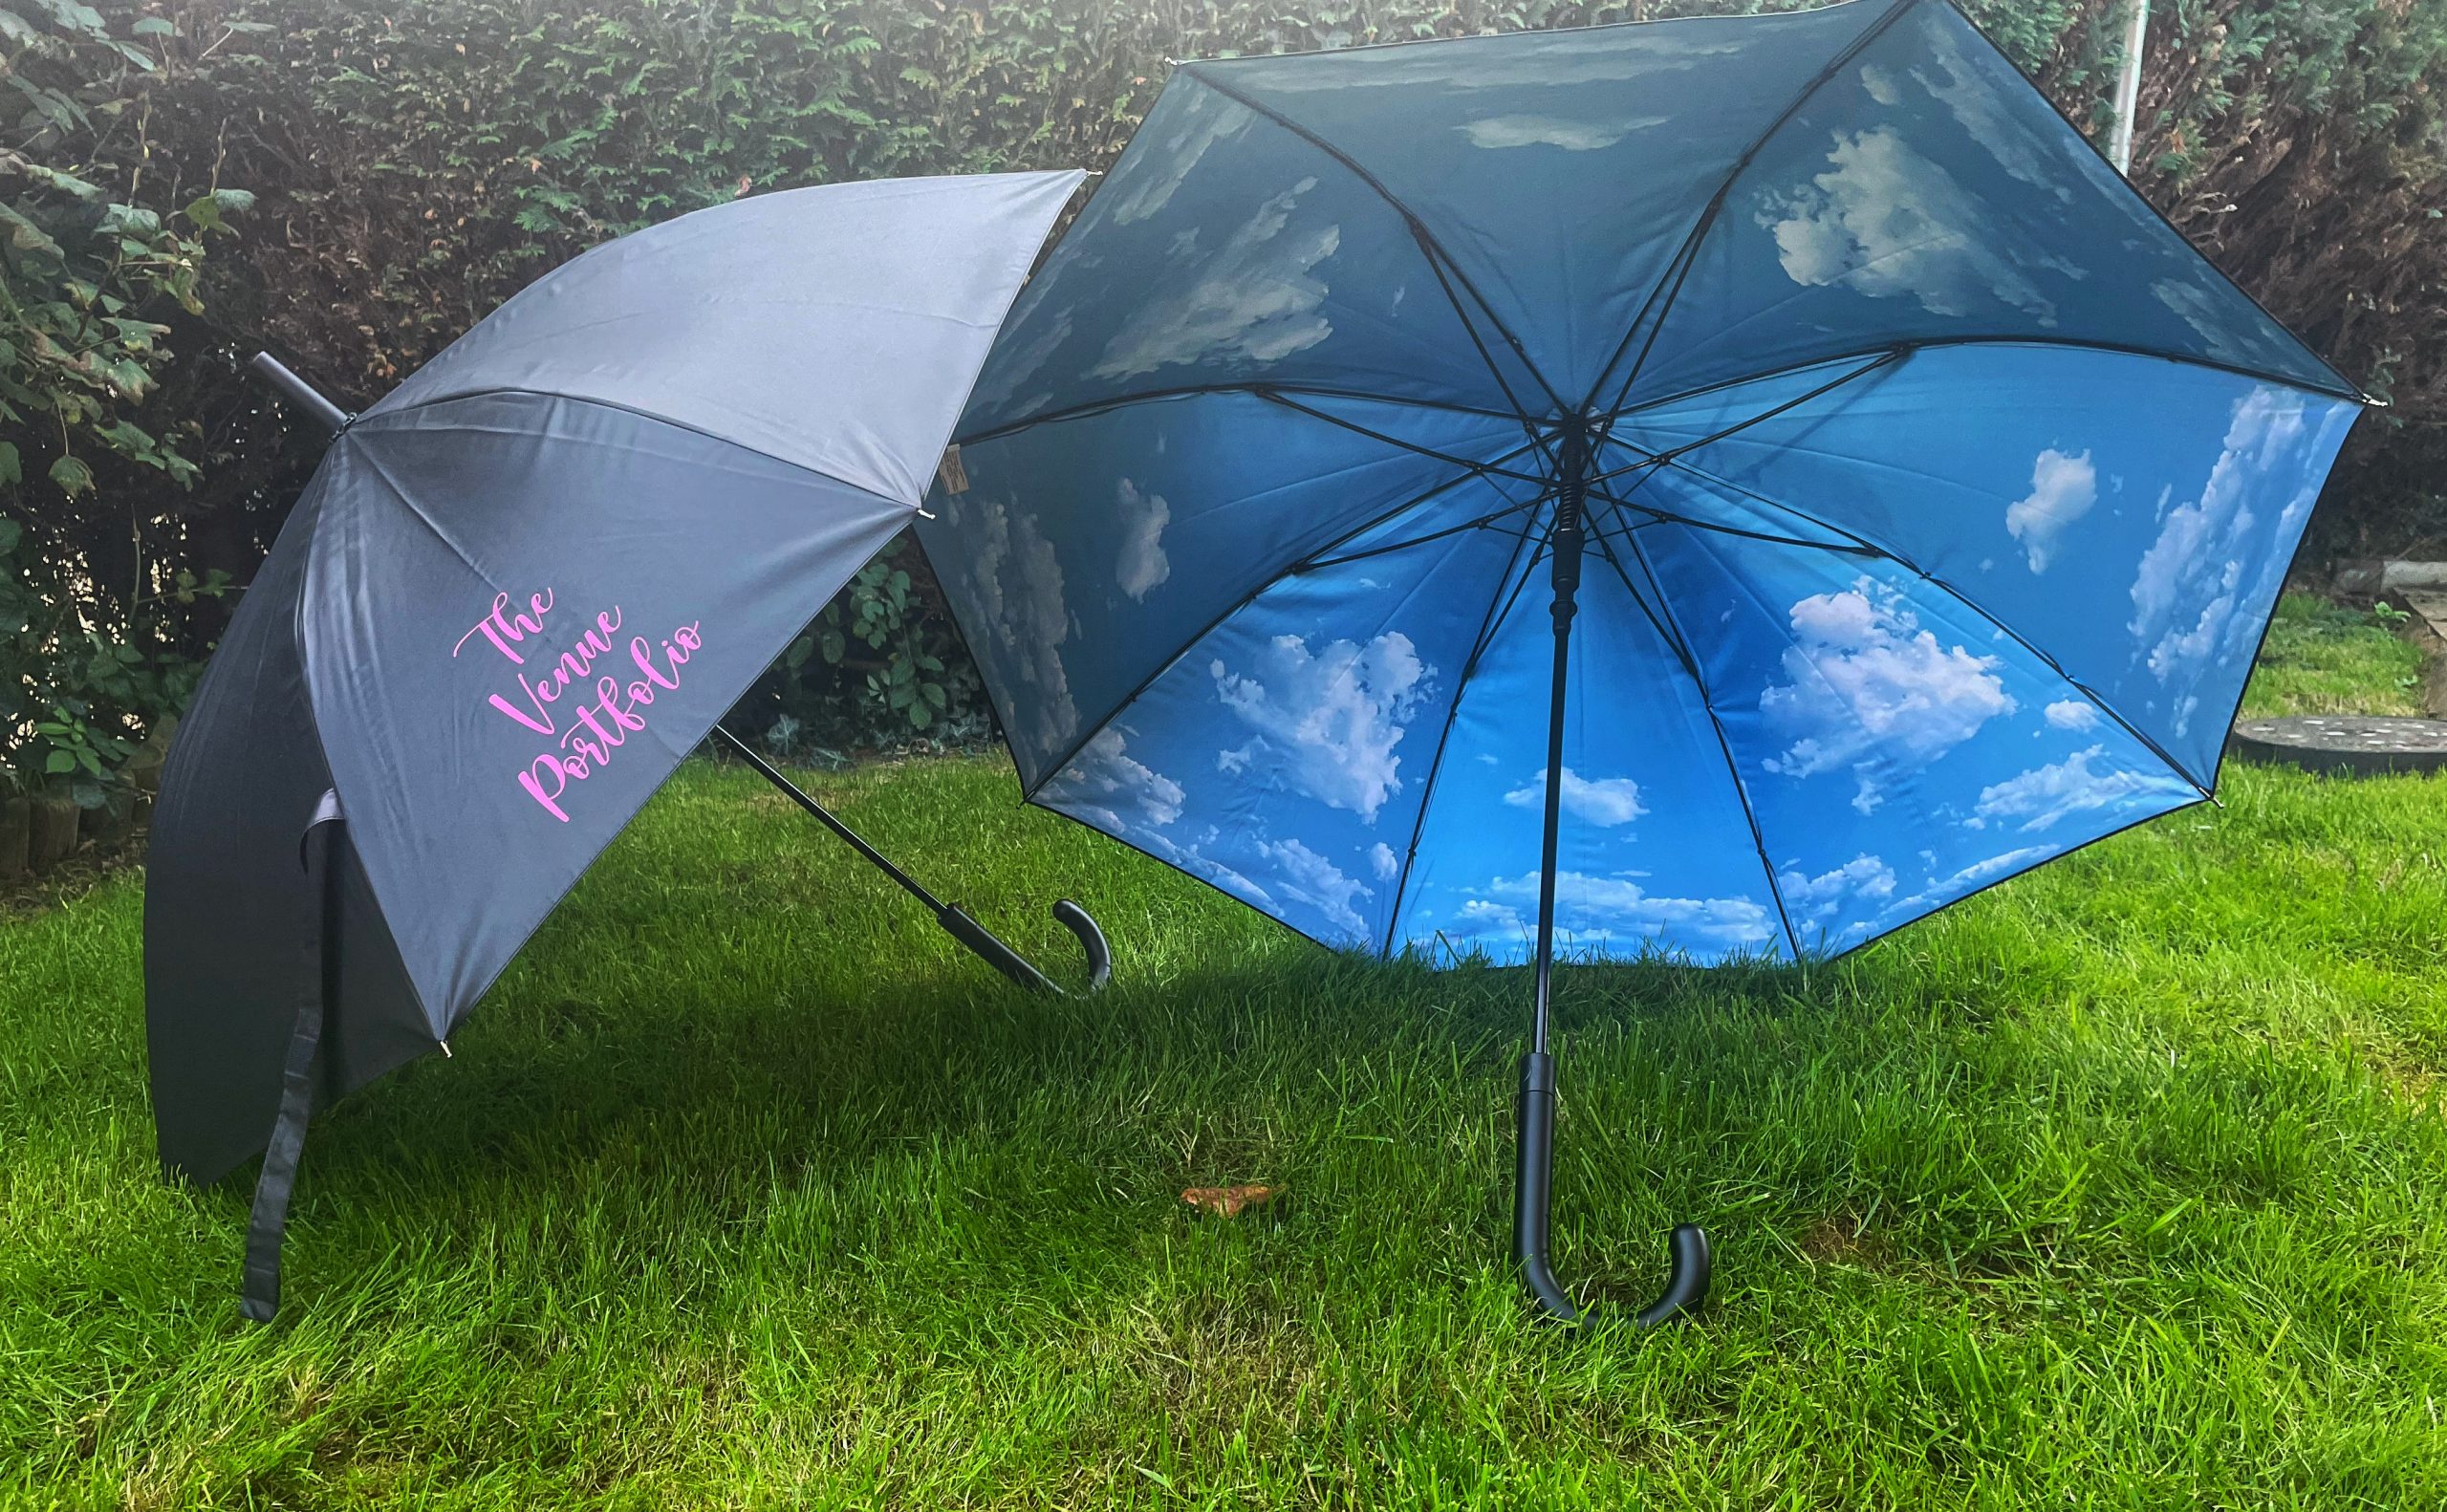 3 things to do if it rains at your outdoor wedding